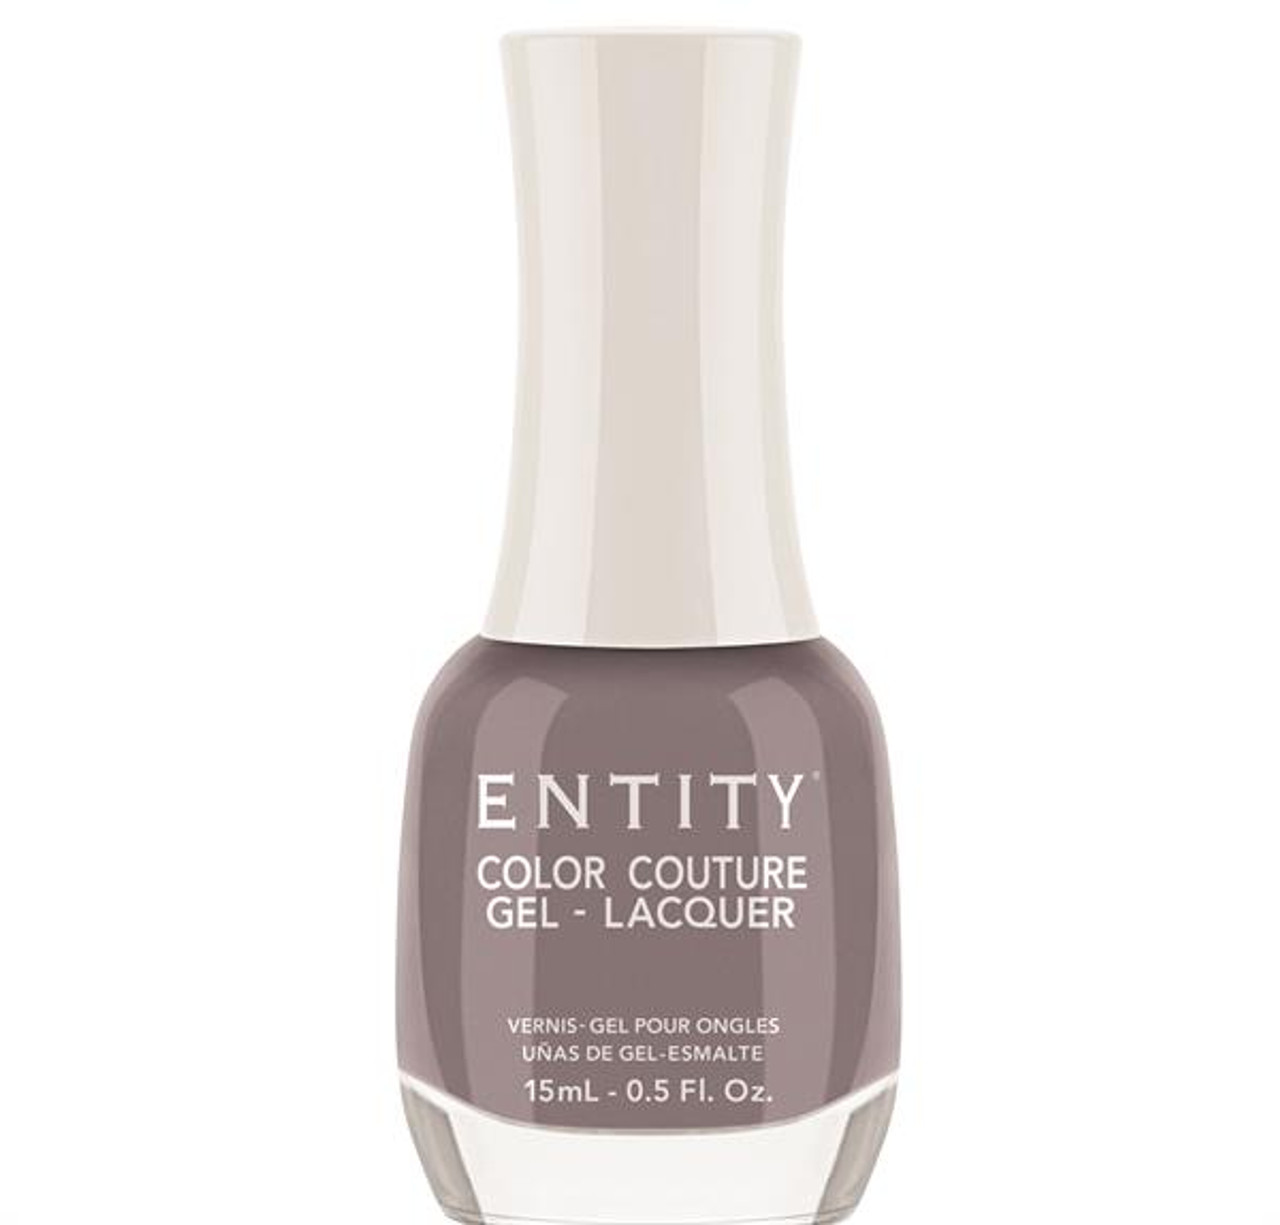 Entity Color Couture Gel-Lacquer Fedora Flair - 15 mL / .5 fl oz